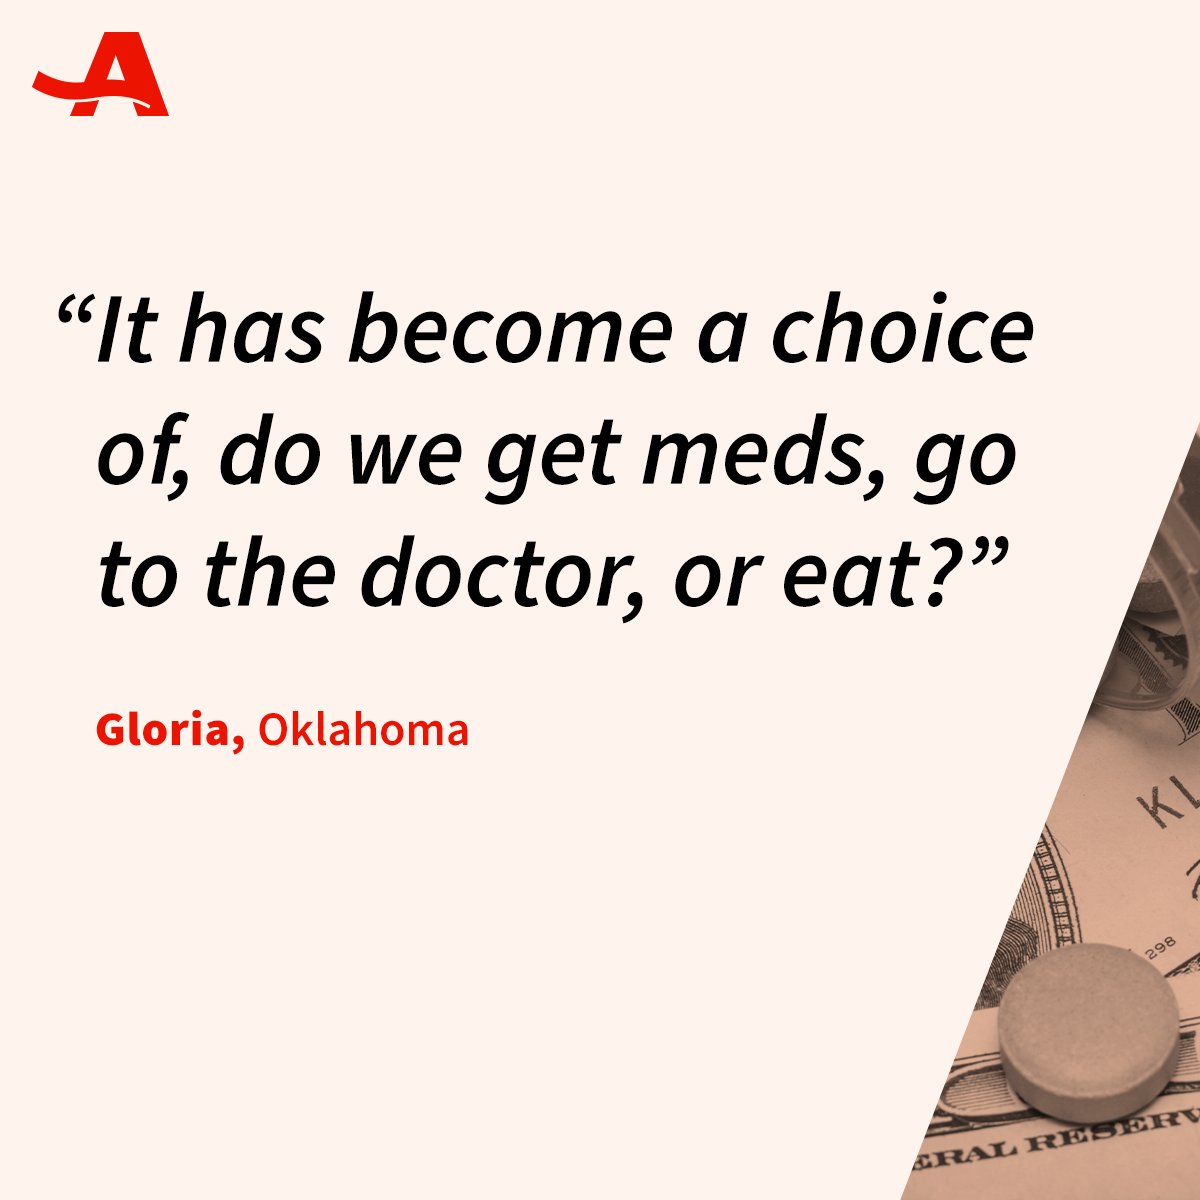 For older Americans like Gloria, we continue to fight for #FairRxPricesNow. Learn more: spr.ly/6017jdSIc #MedicationMonday